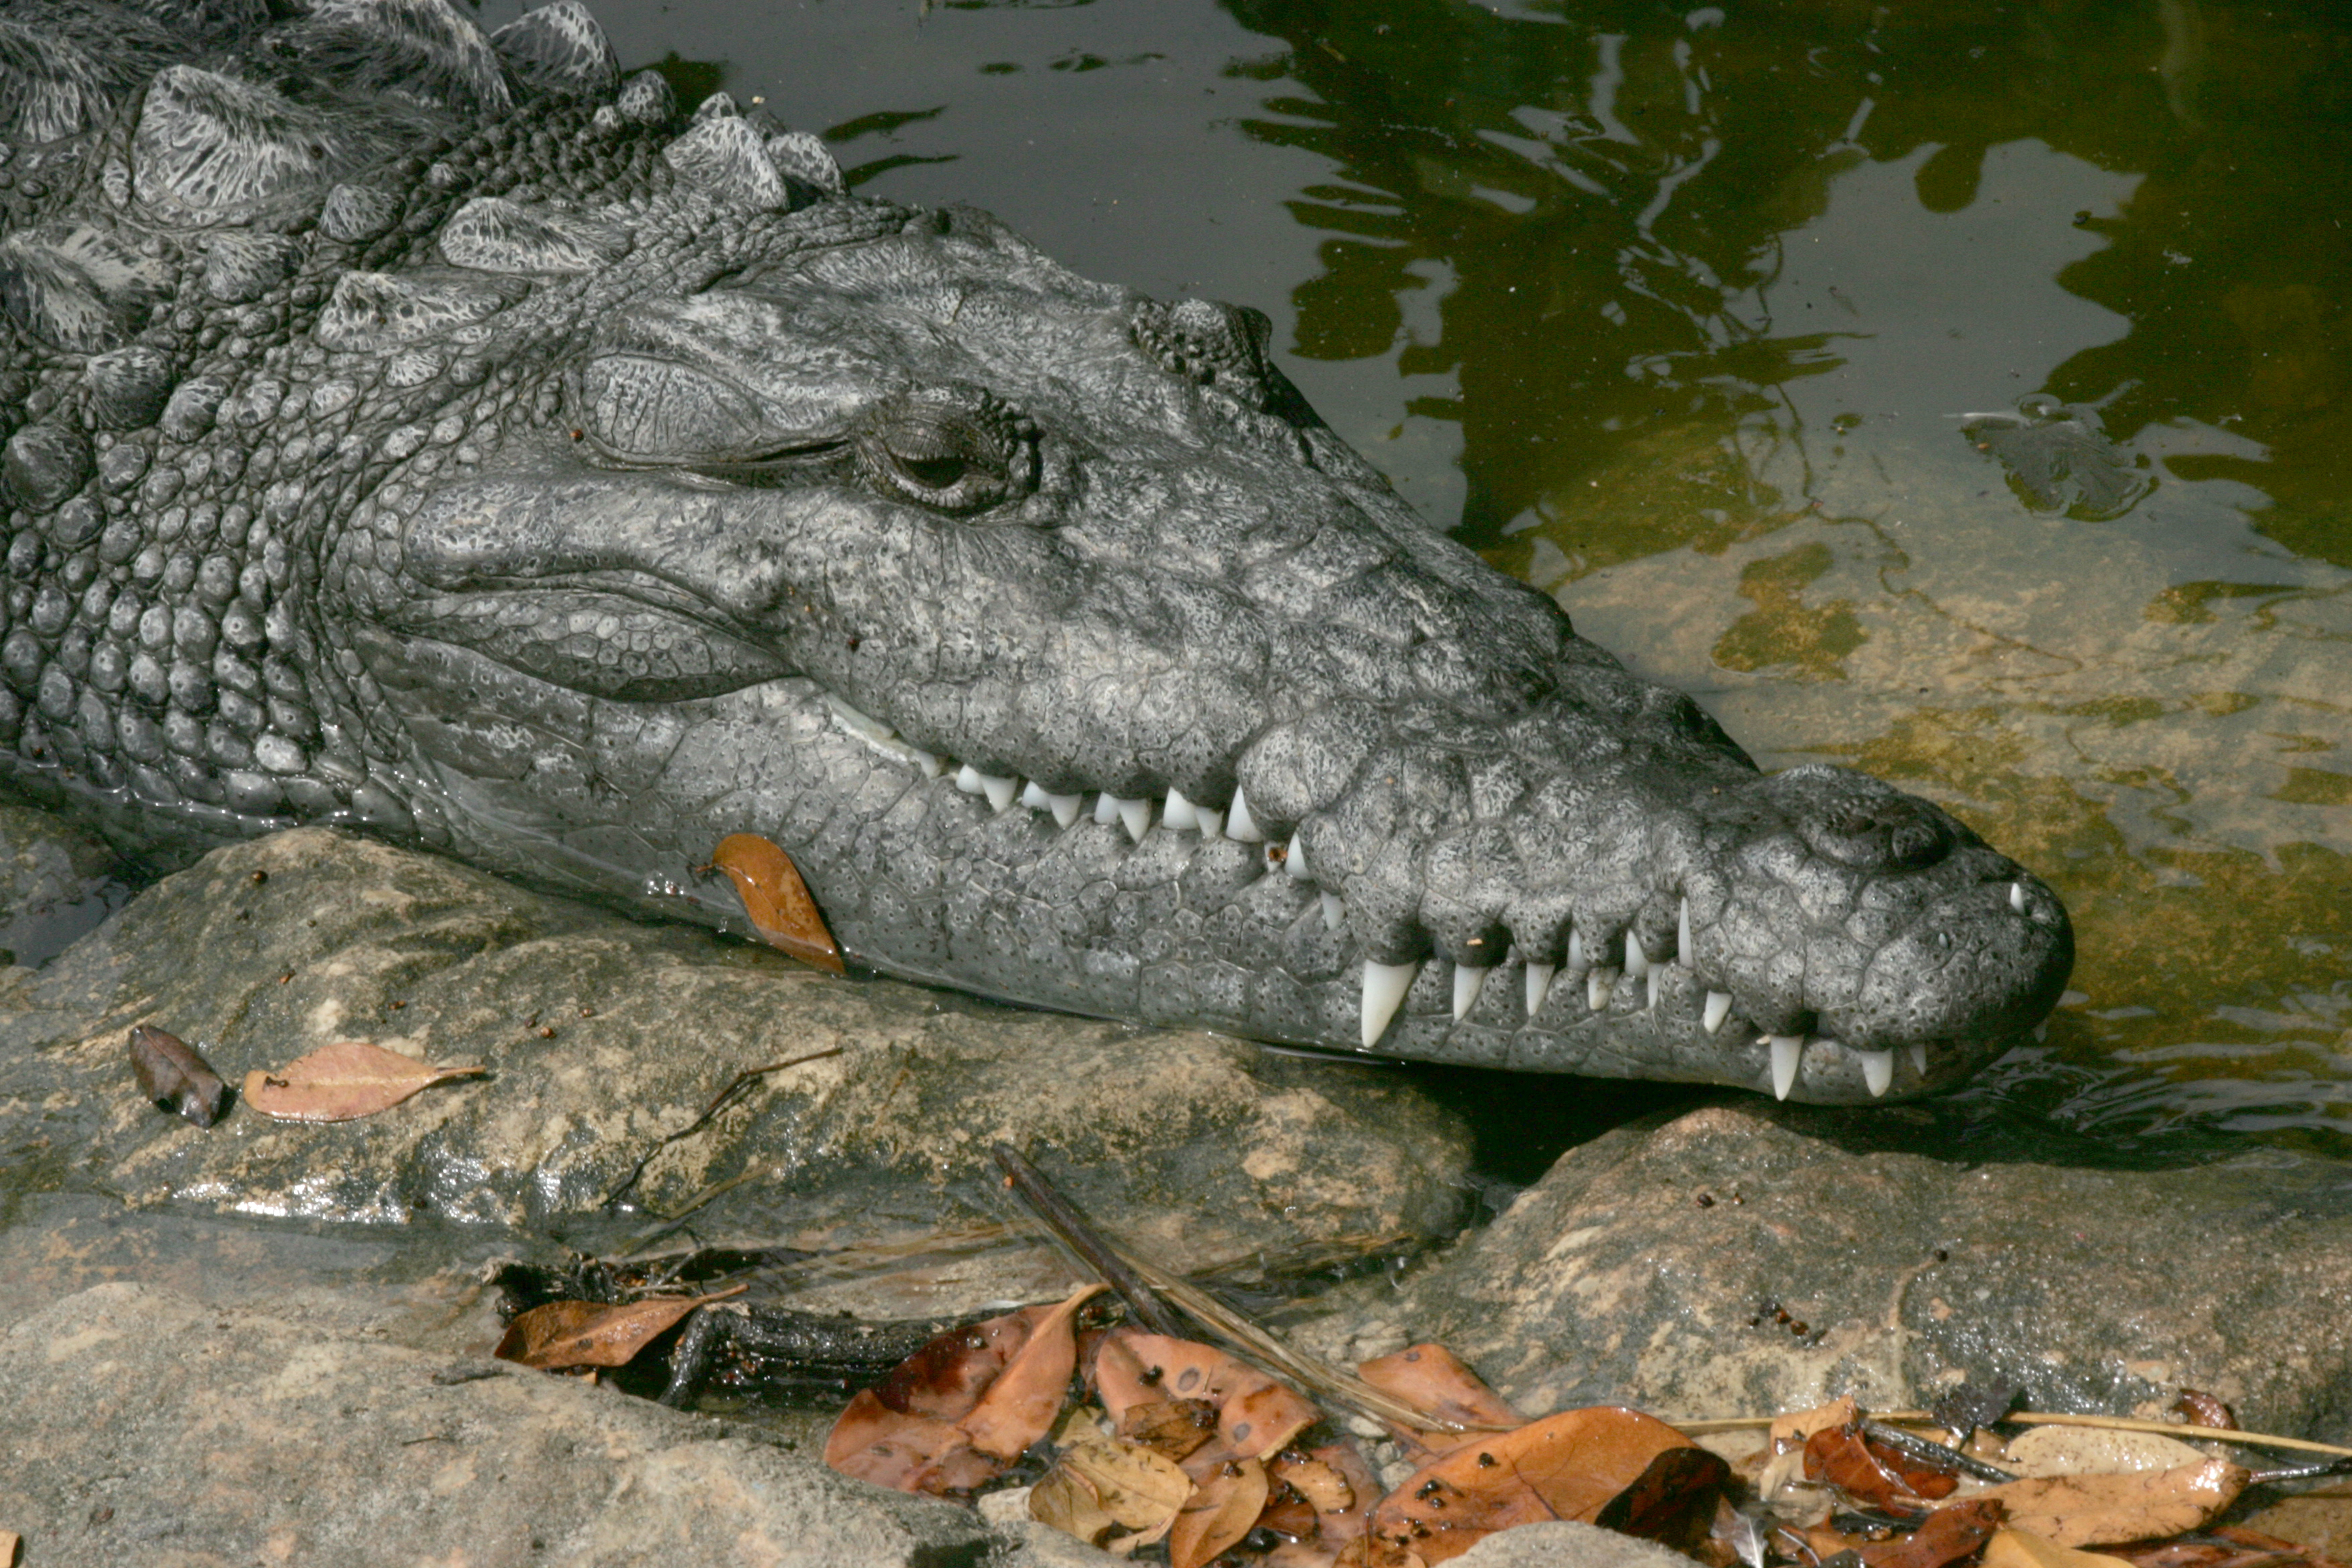 A large gery reptile on the bank of a water body with large, sharp, white teeth